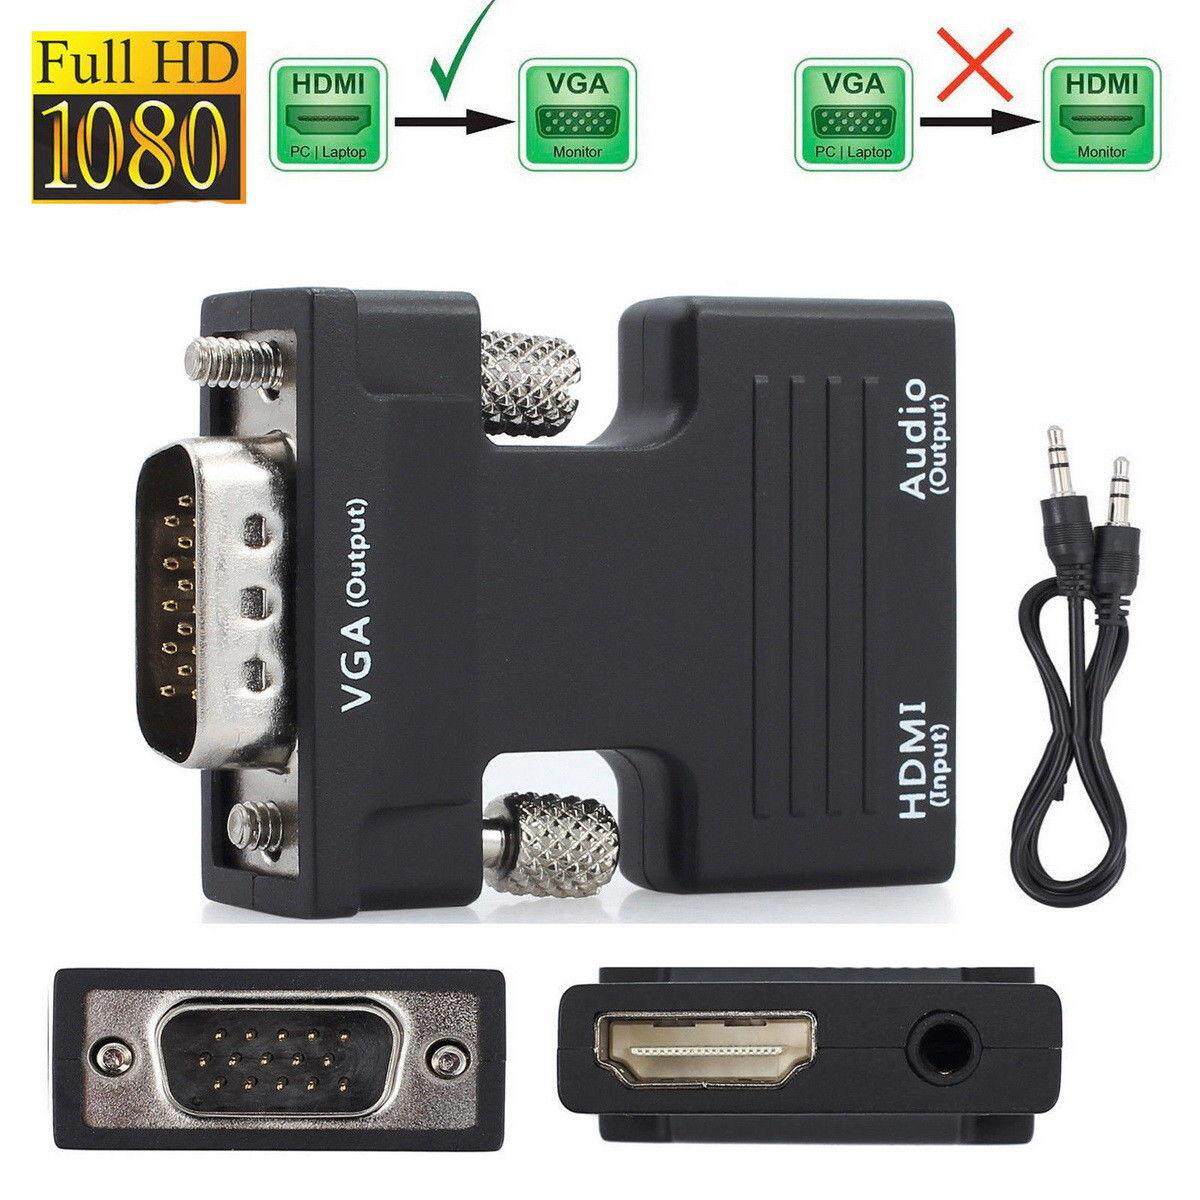 1080P HDMI Female to VGA Male with Audio Output Cable Converter Adapter Lead